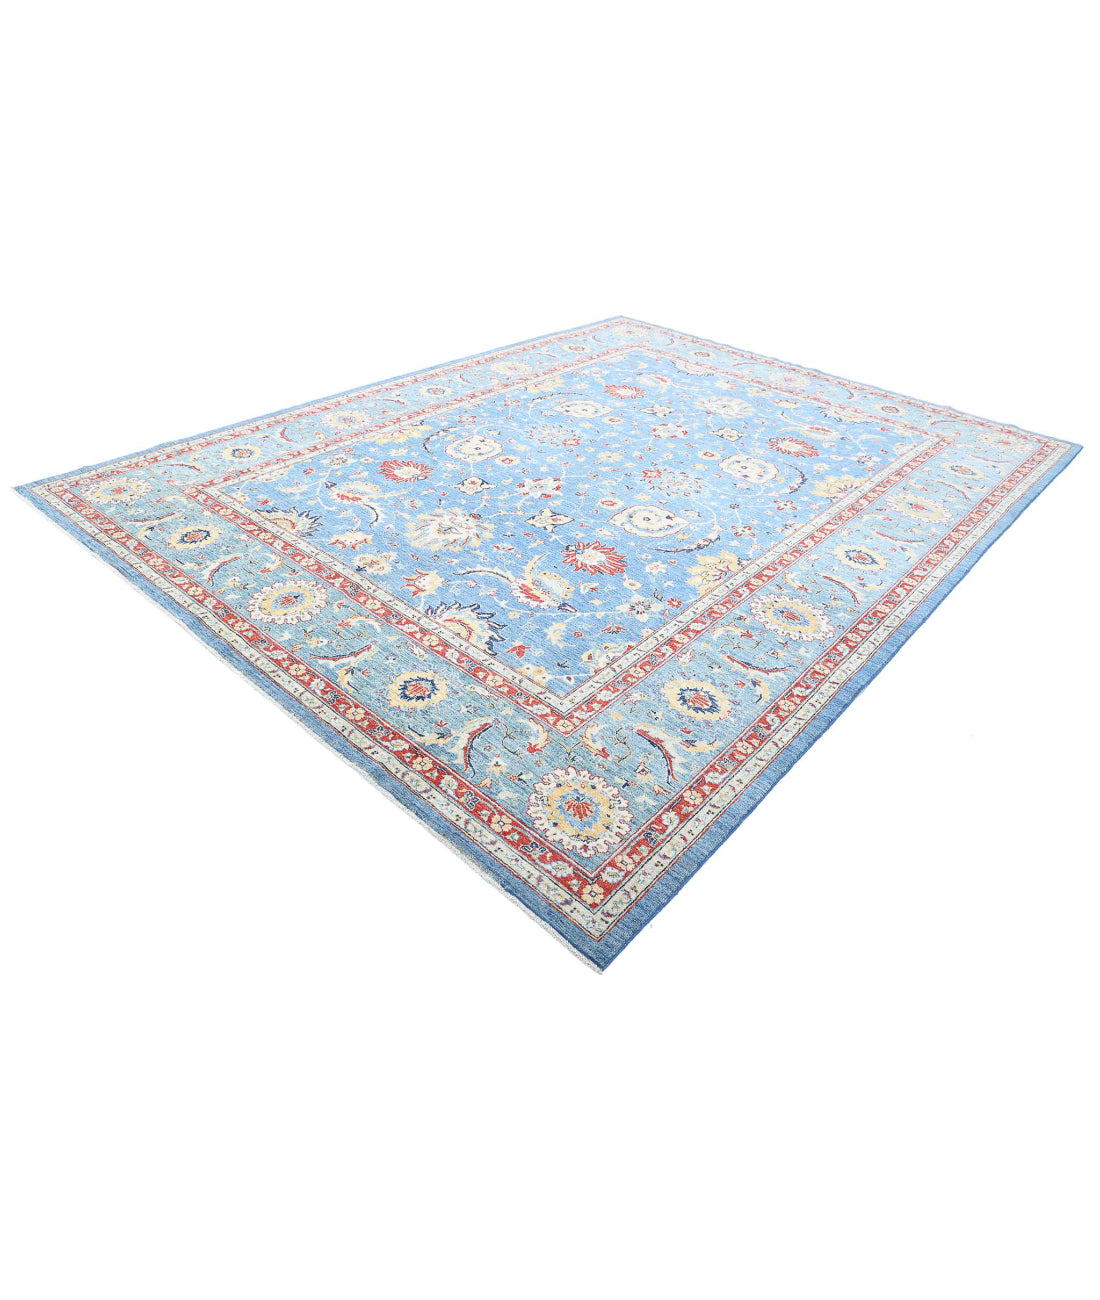 Ziegler 8'11'' X 11'10'' Hand-Knotted Wool Rug 8'11'' x 11'10'' (268 X 355) / Blue / Red